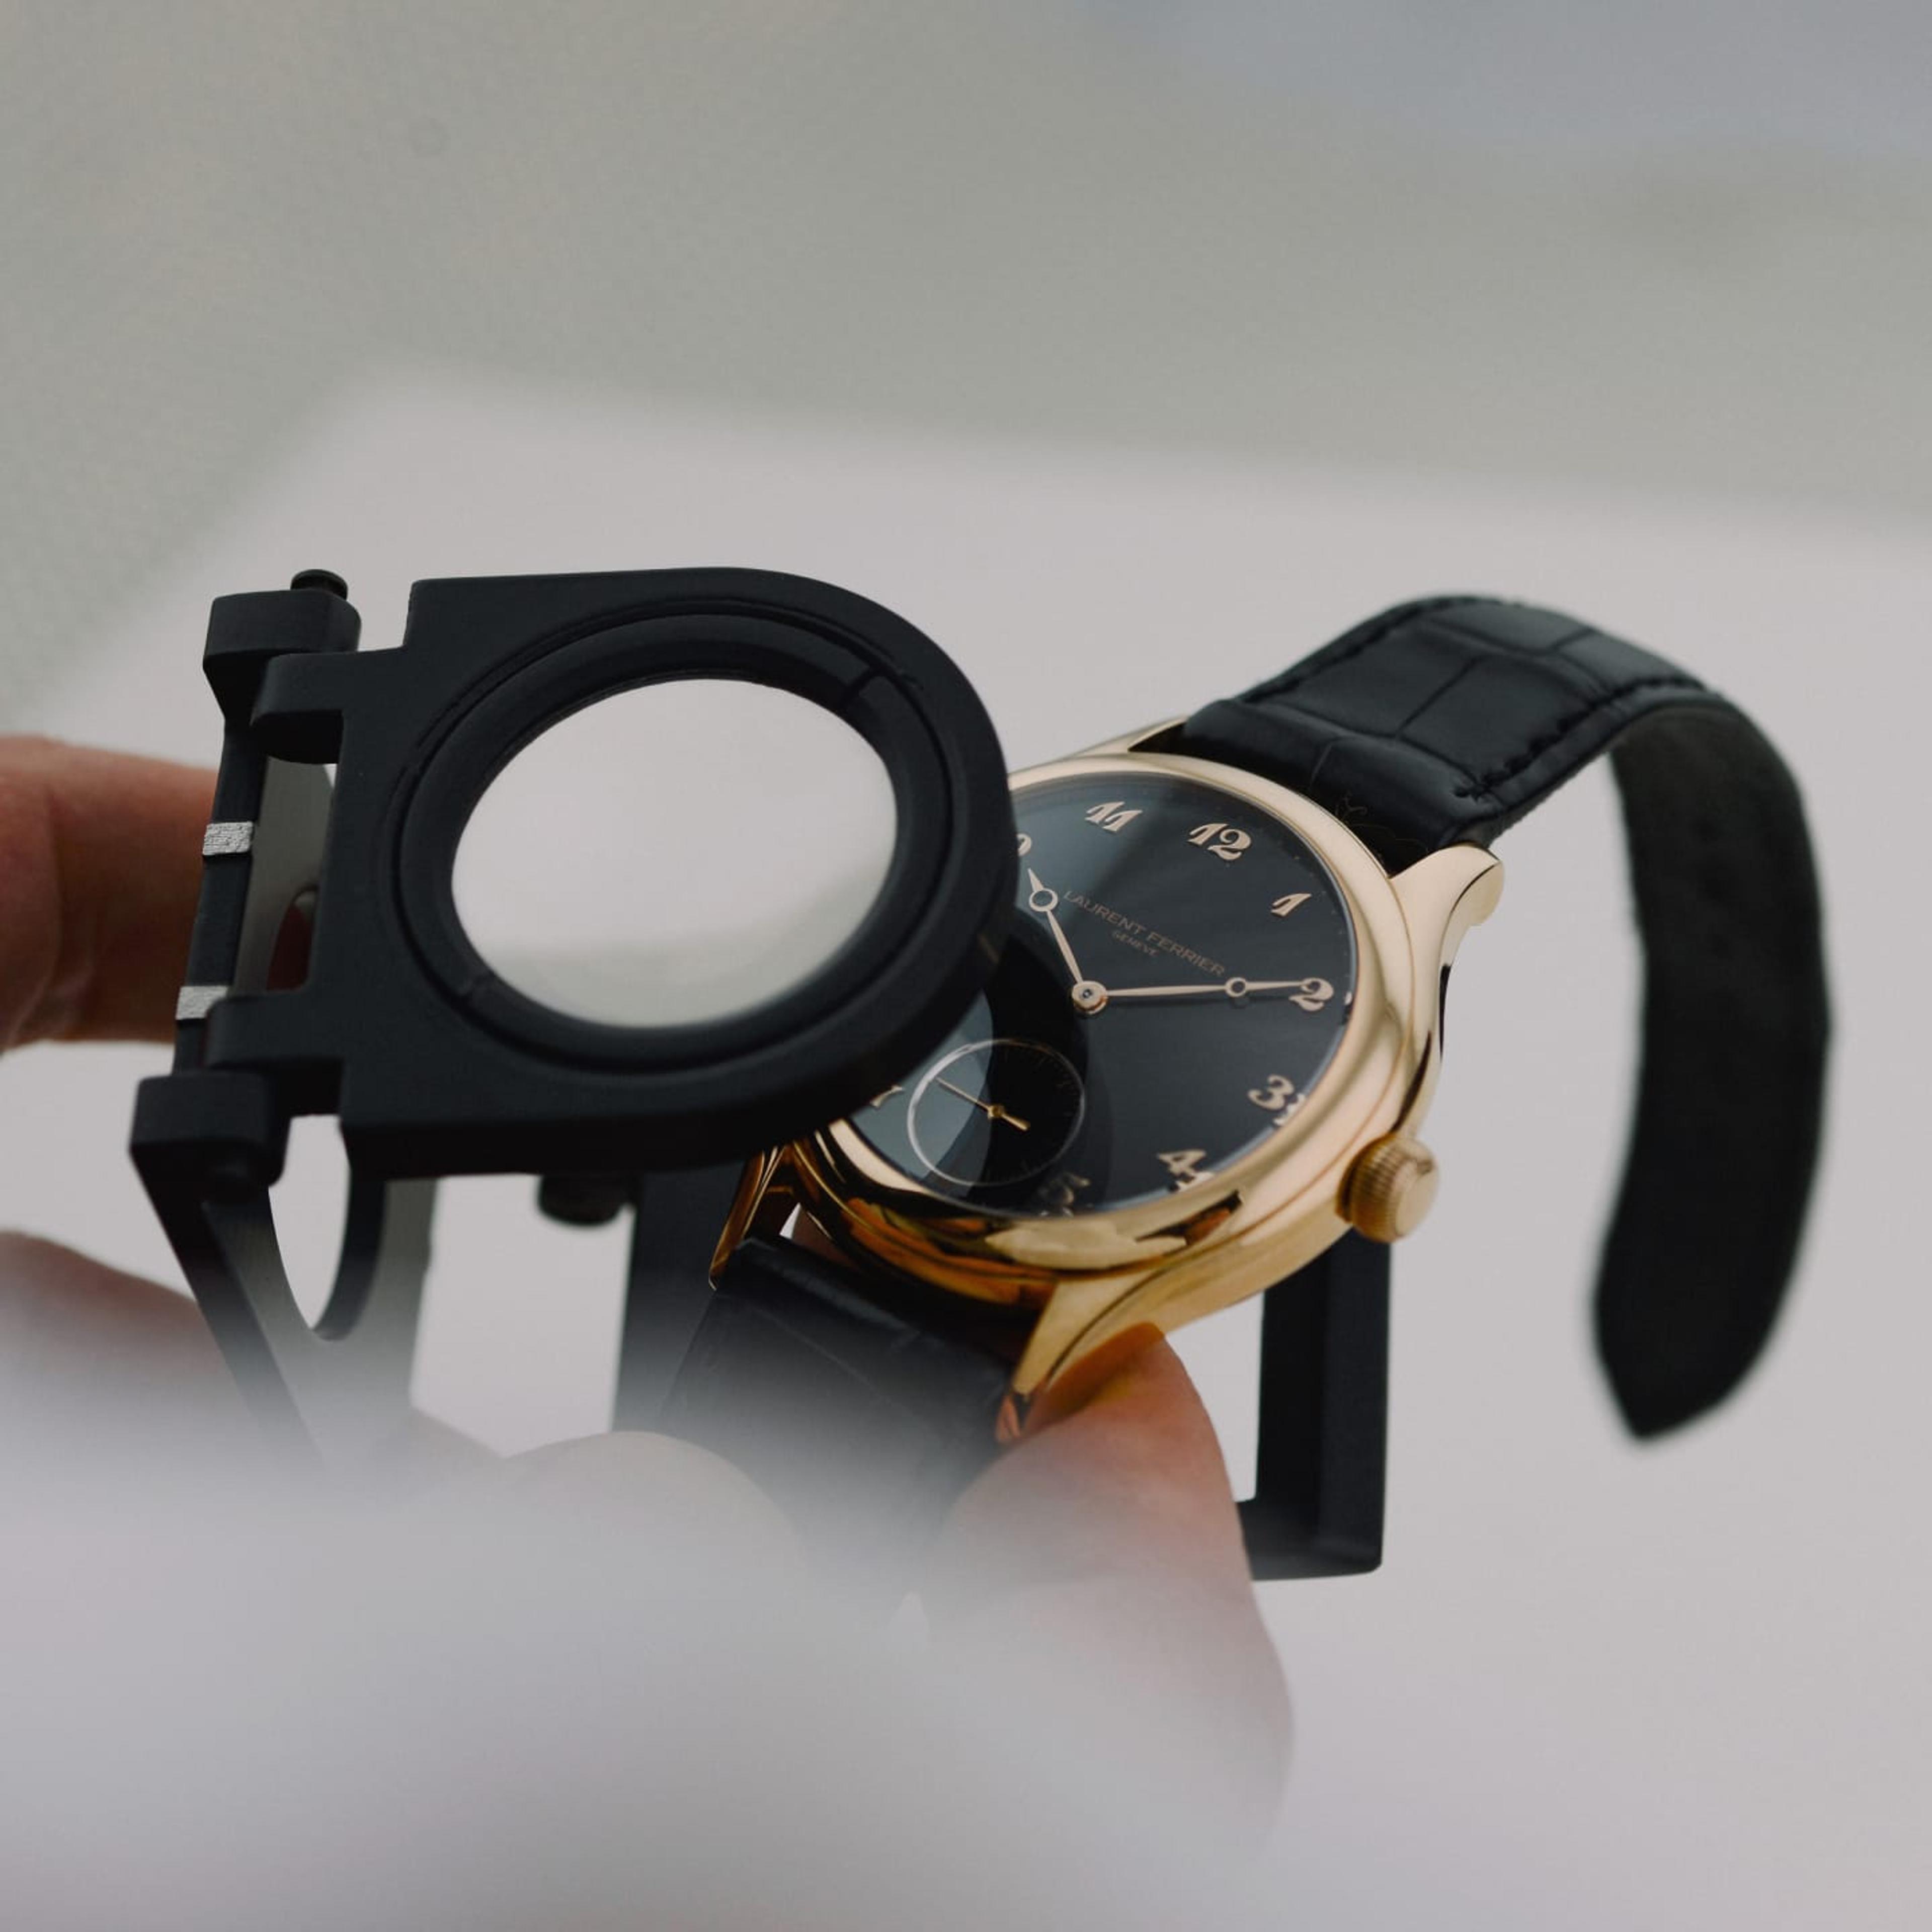 A watch viewed through a loupe